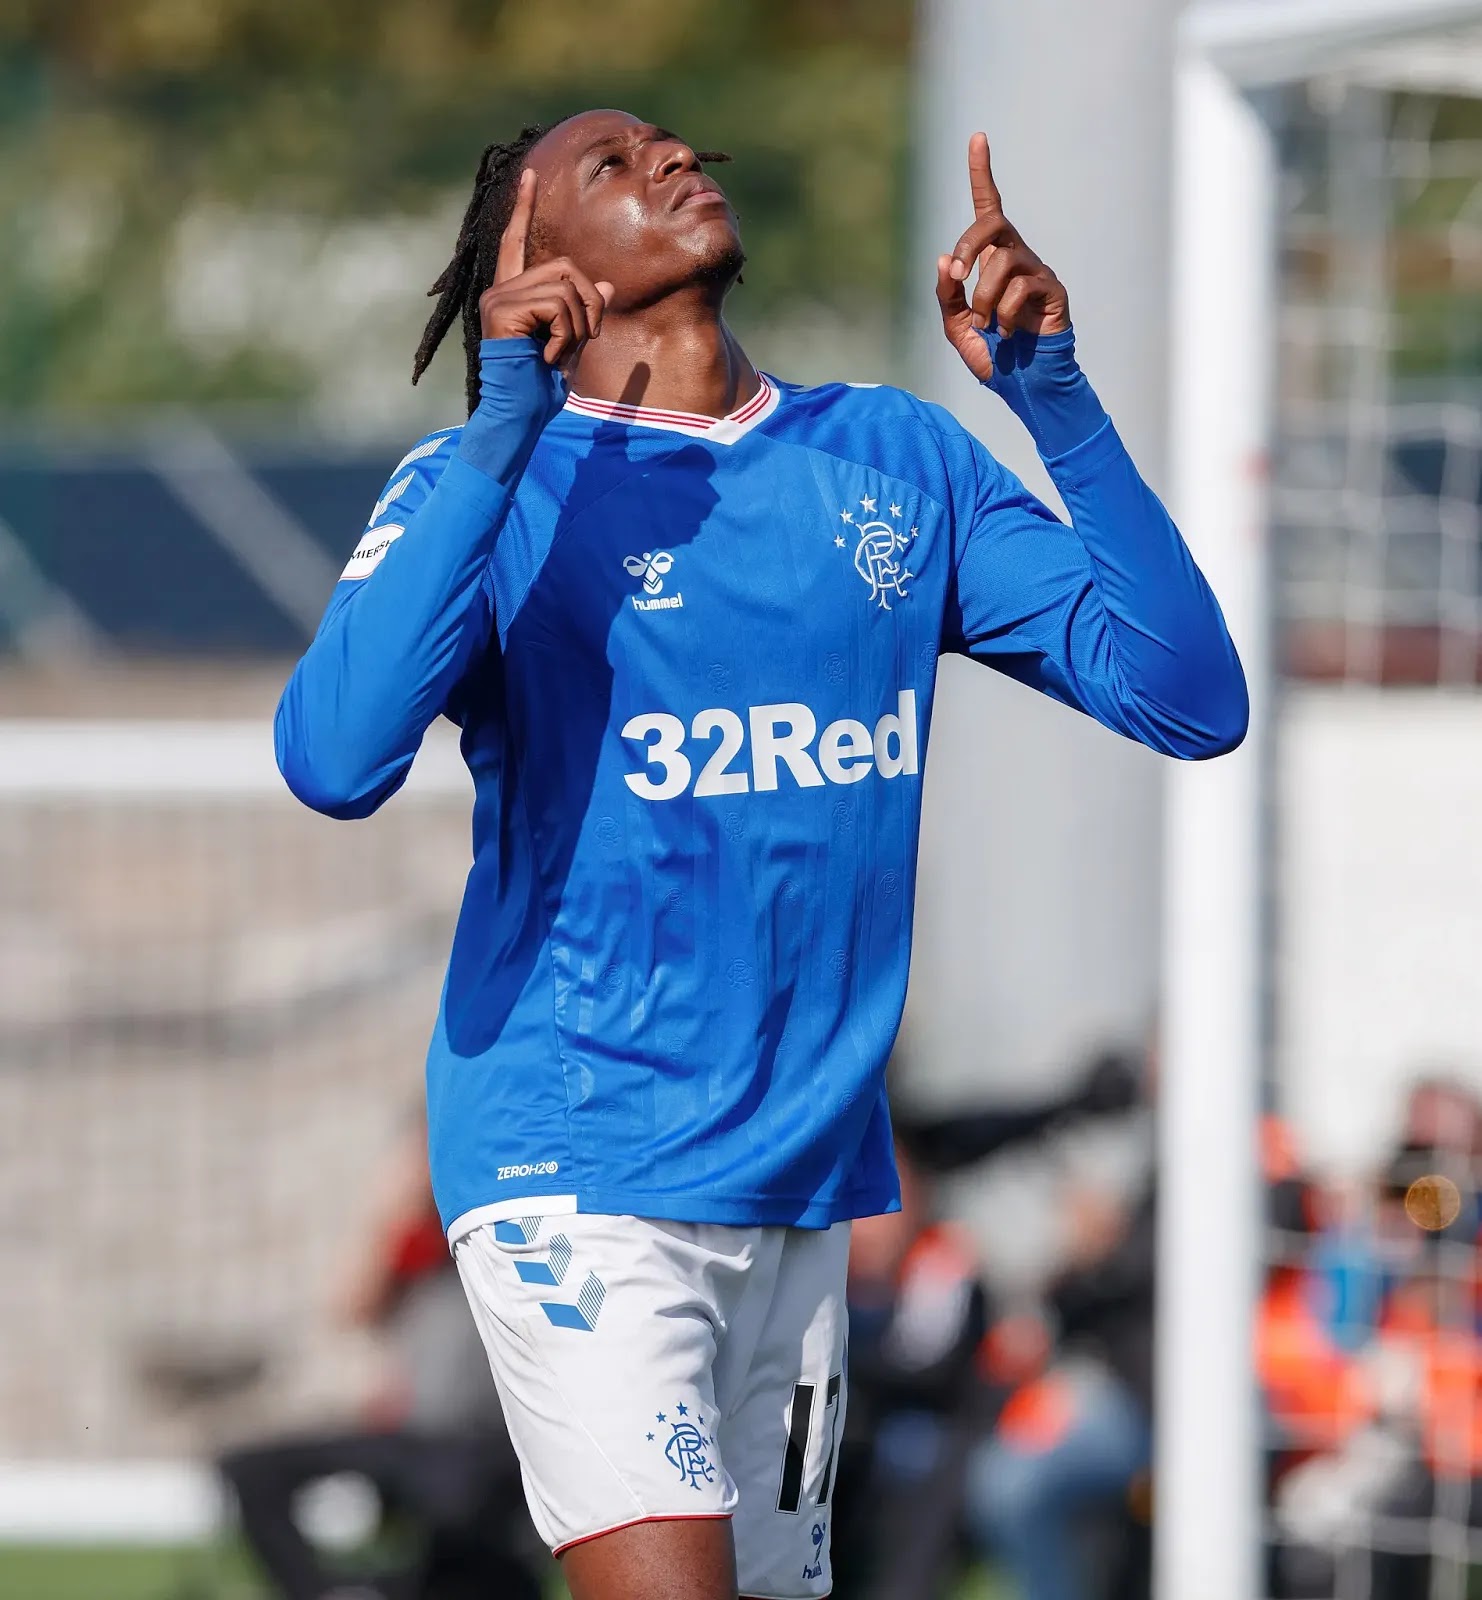 “Not doing enough” – Rangers star man needs to step up